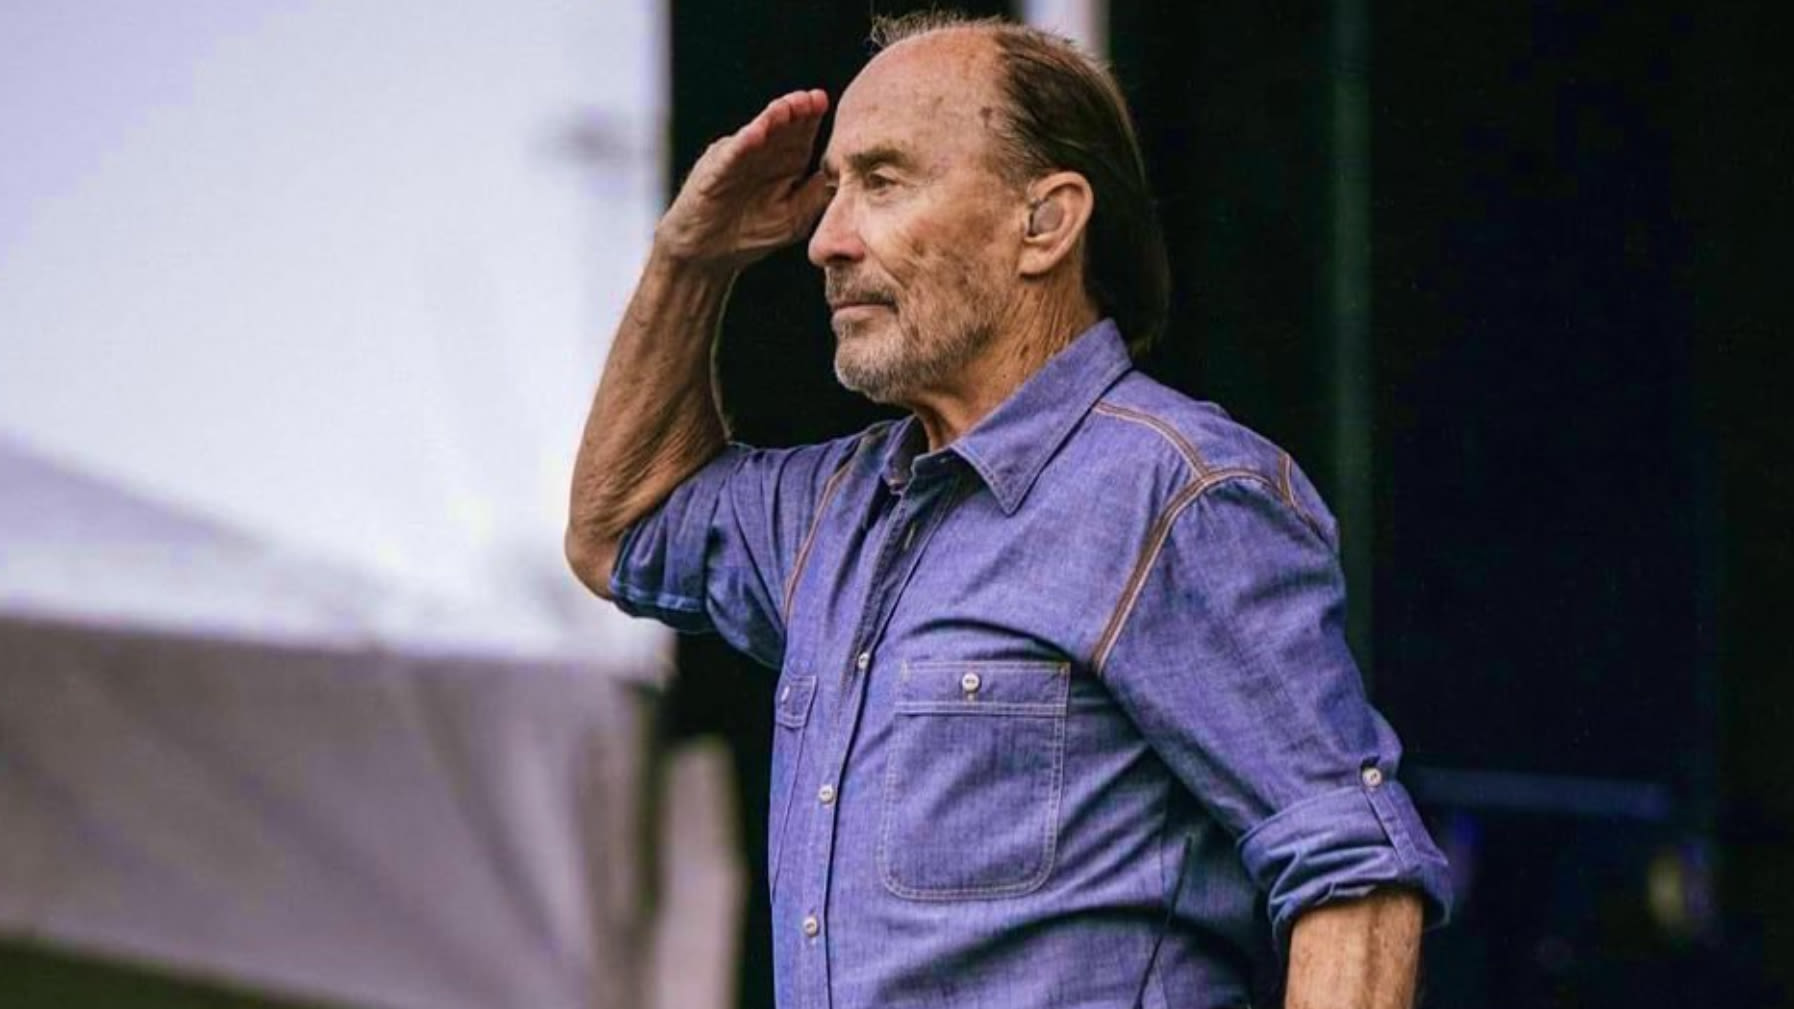 Lee Greenwood's Message to Veterans: 'America Believes in What You Have Done'